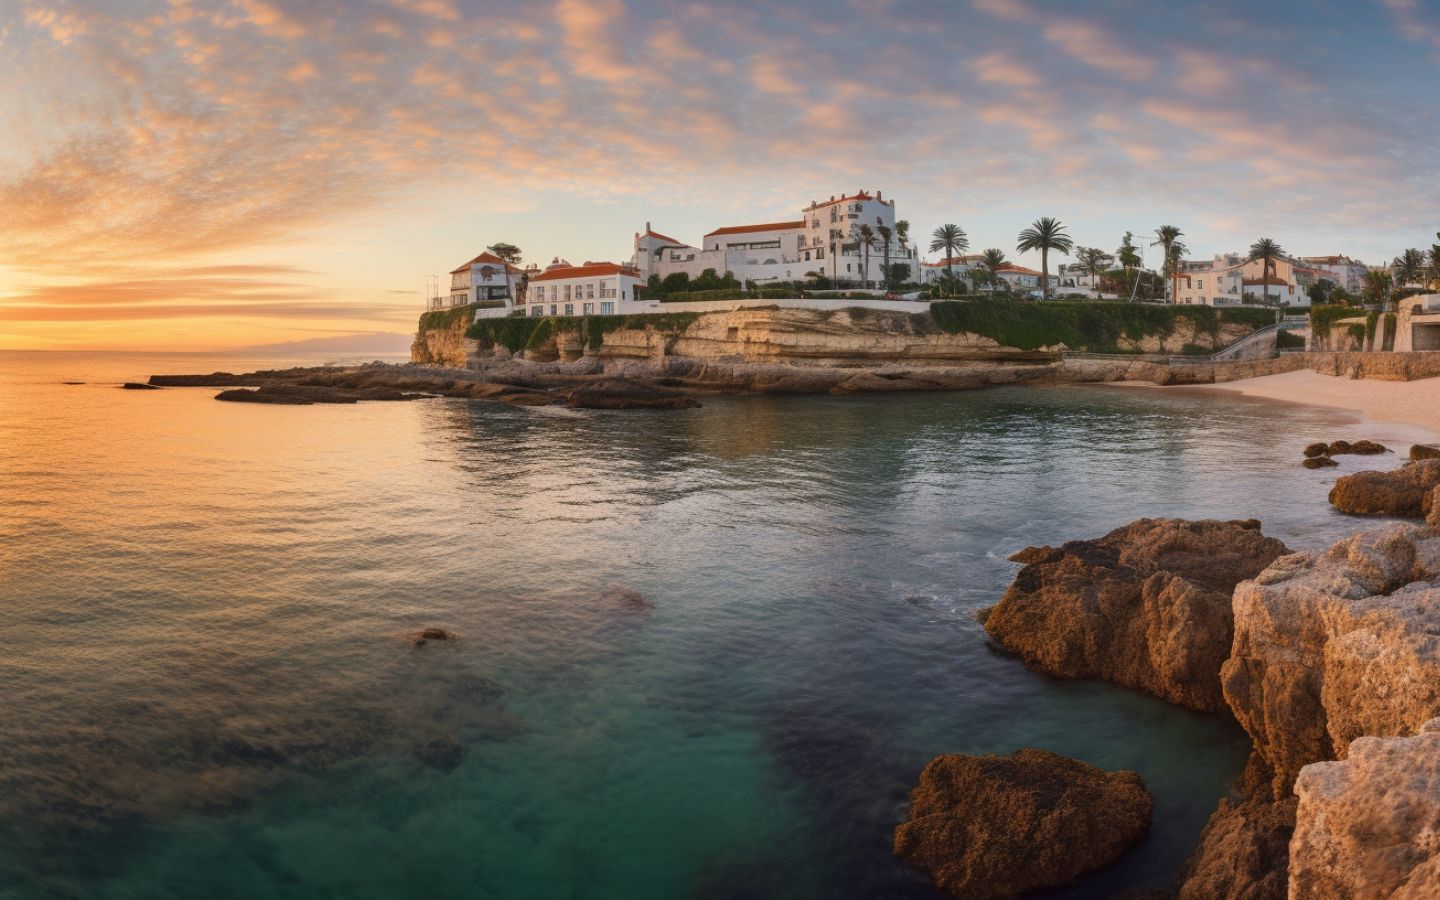 Don’t Miss Out: Join the Fastest-Growing Real Estate Network in Cascais and Reap the Rewards